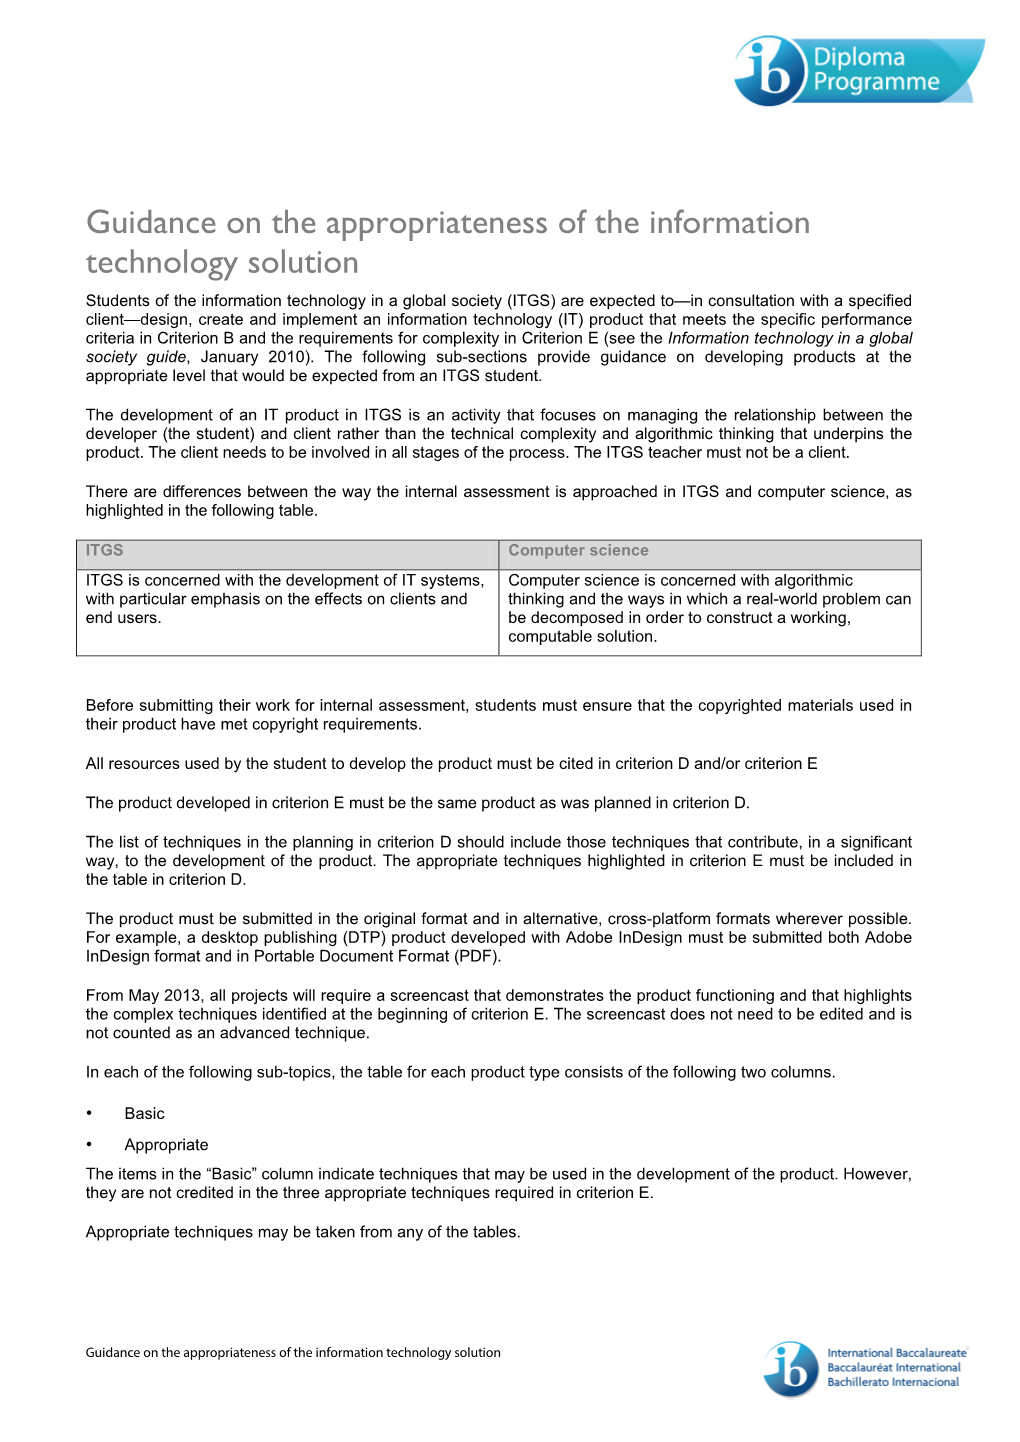 Guidance on the Appropriateness of the Information Technology Solution